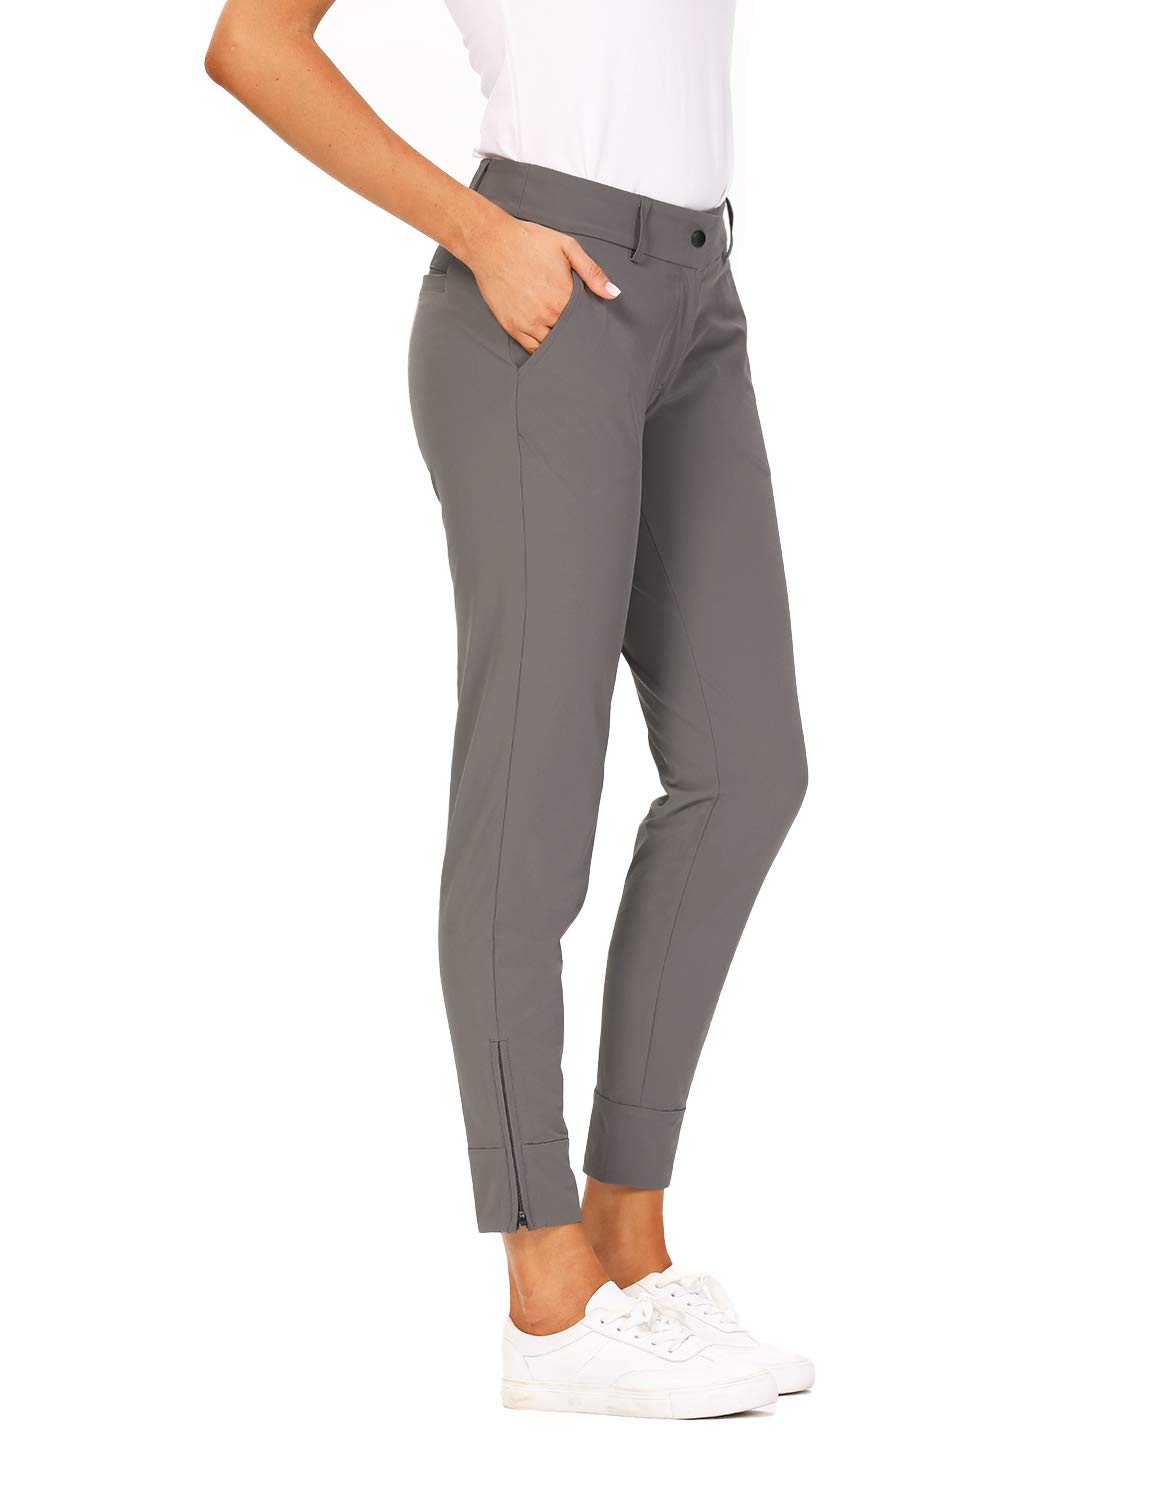 Hiverlay Womens pro golf Pants Quick Dry Slim Lightweight Work Pants with Straight Ankle Also for Hiking or casual Ladies,gray-l